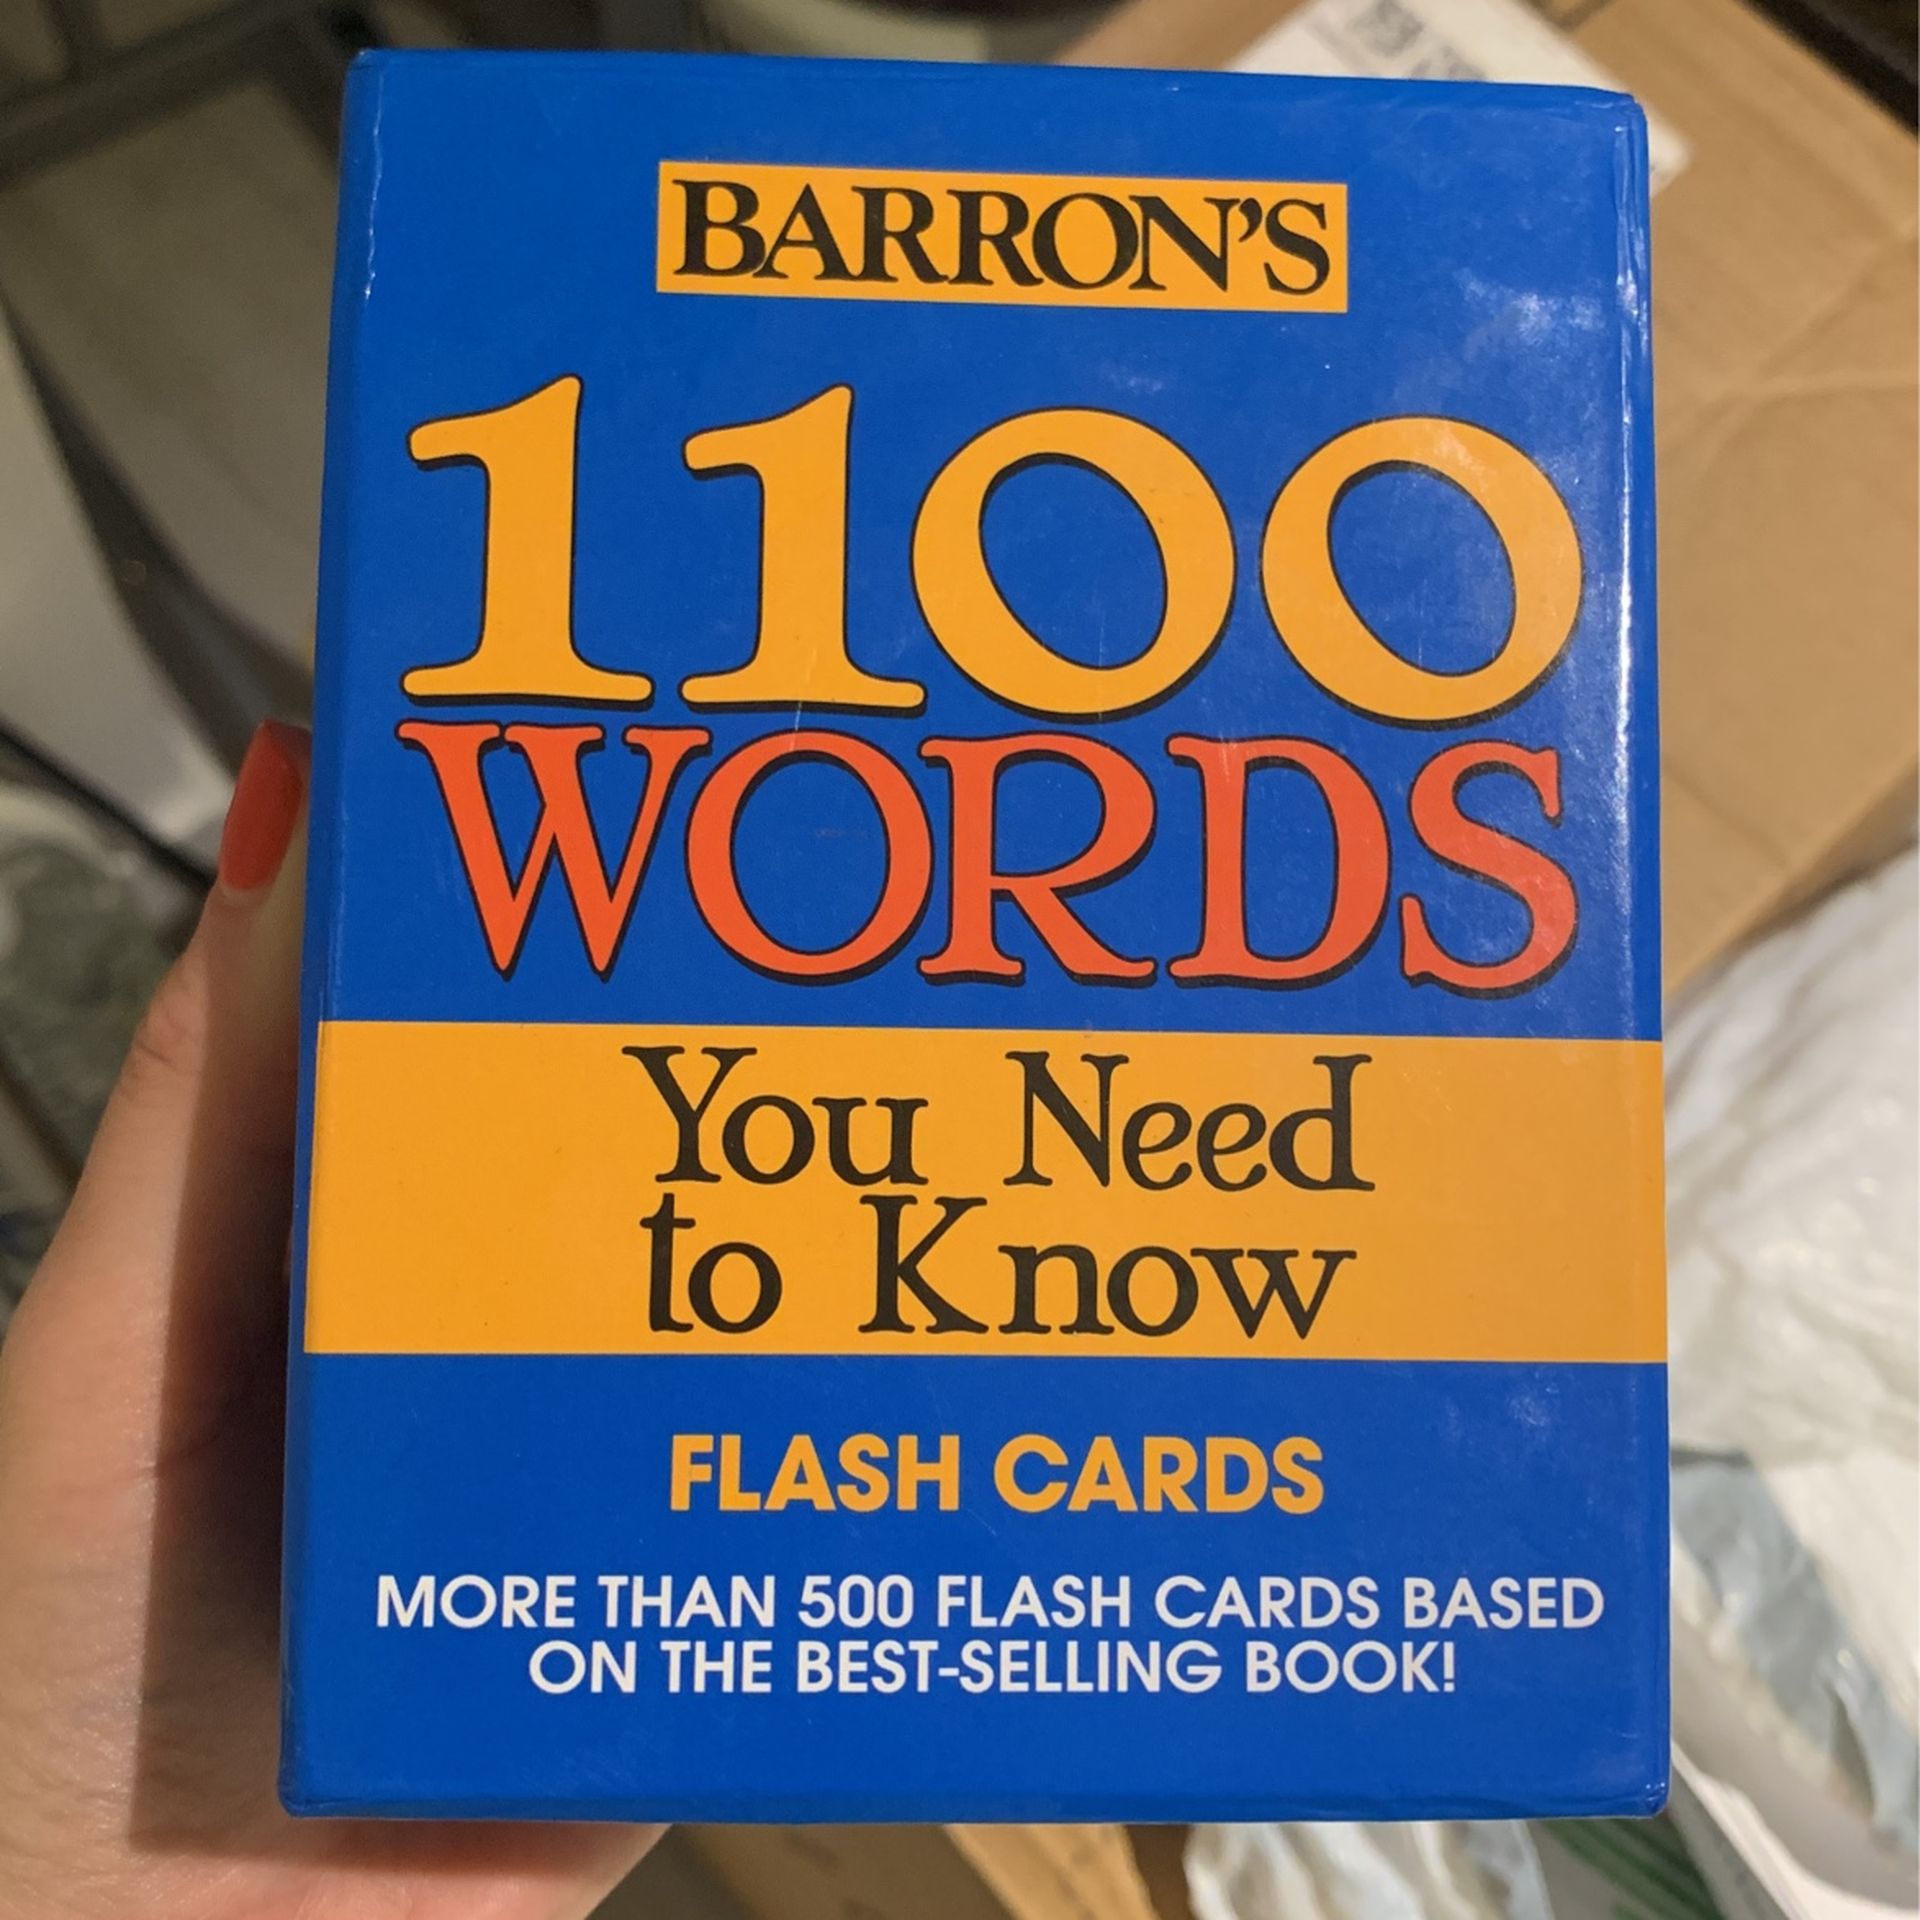 FL　Need　Know　Words　Miami,　Barron's　1100　in　for　You　Sale　To　OfferUp